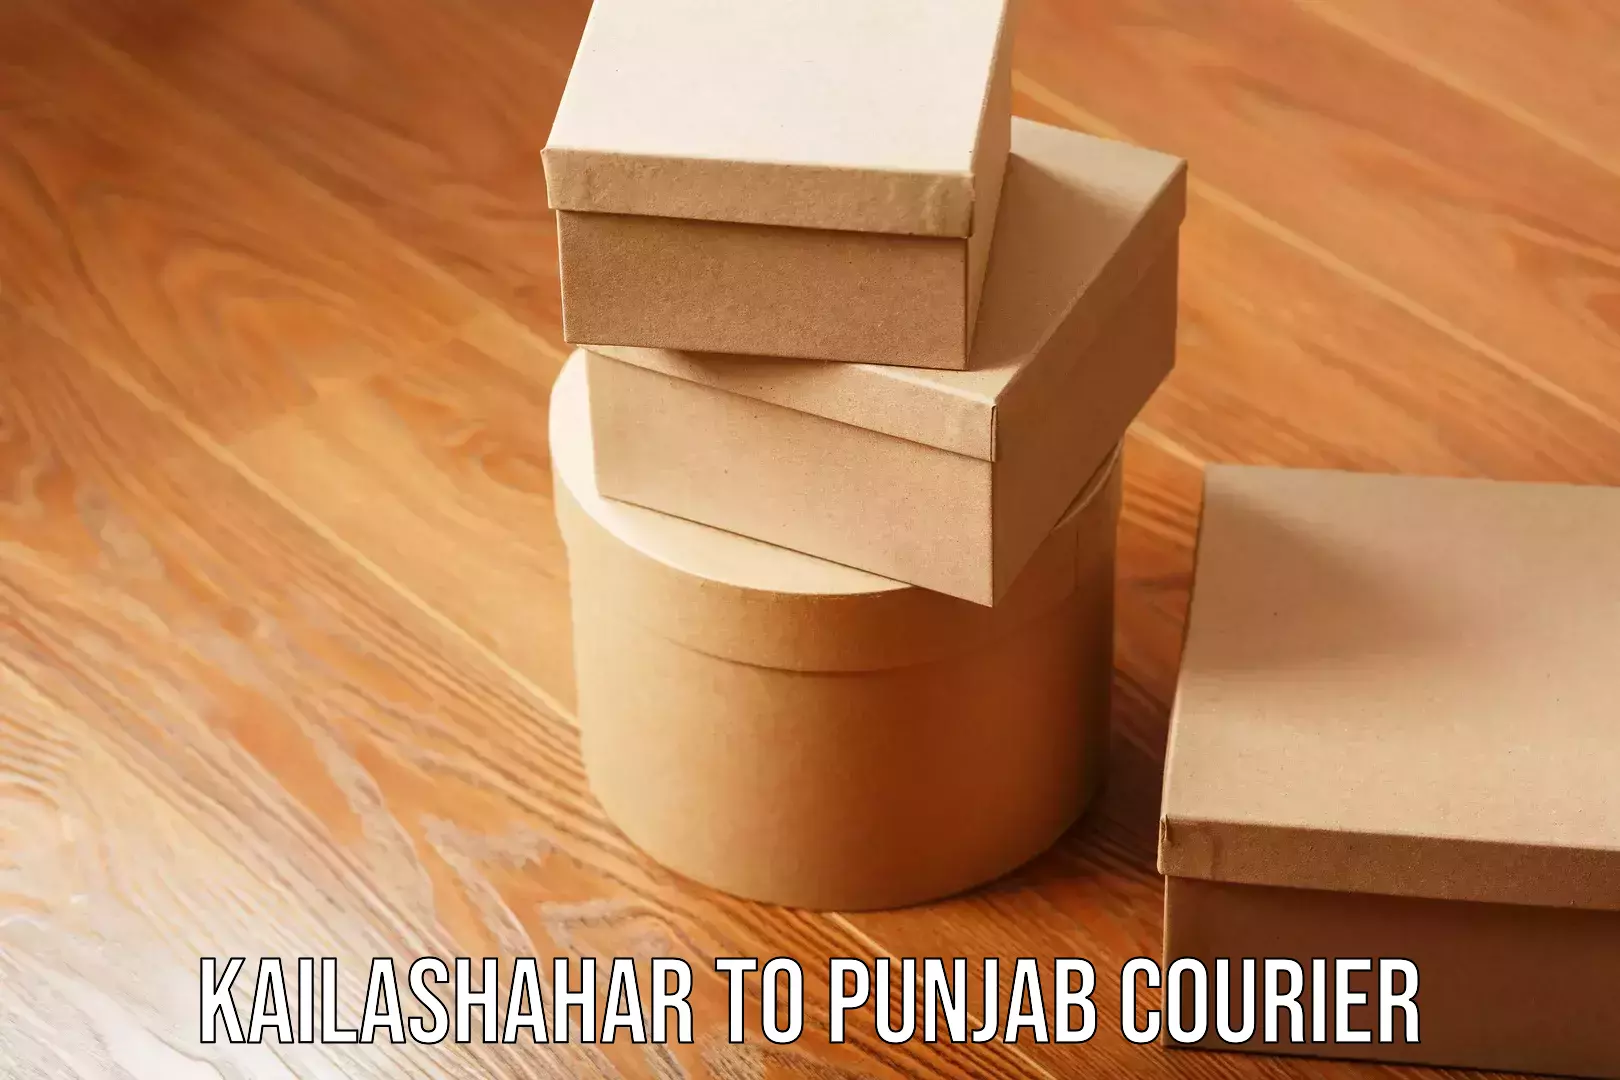 Automated parcel services Kailashahar to Punjab